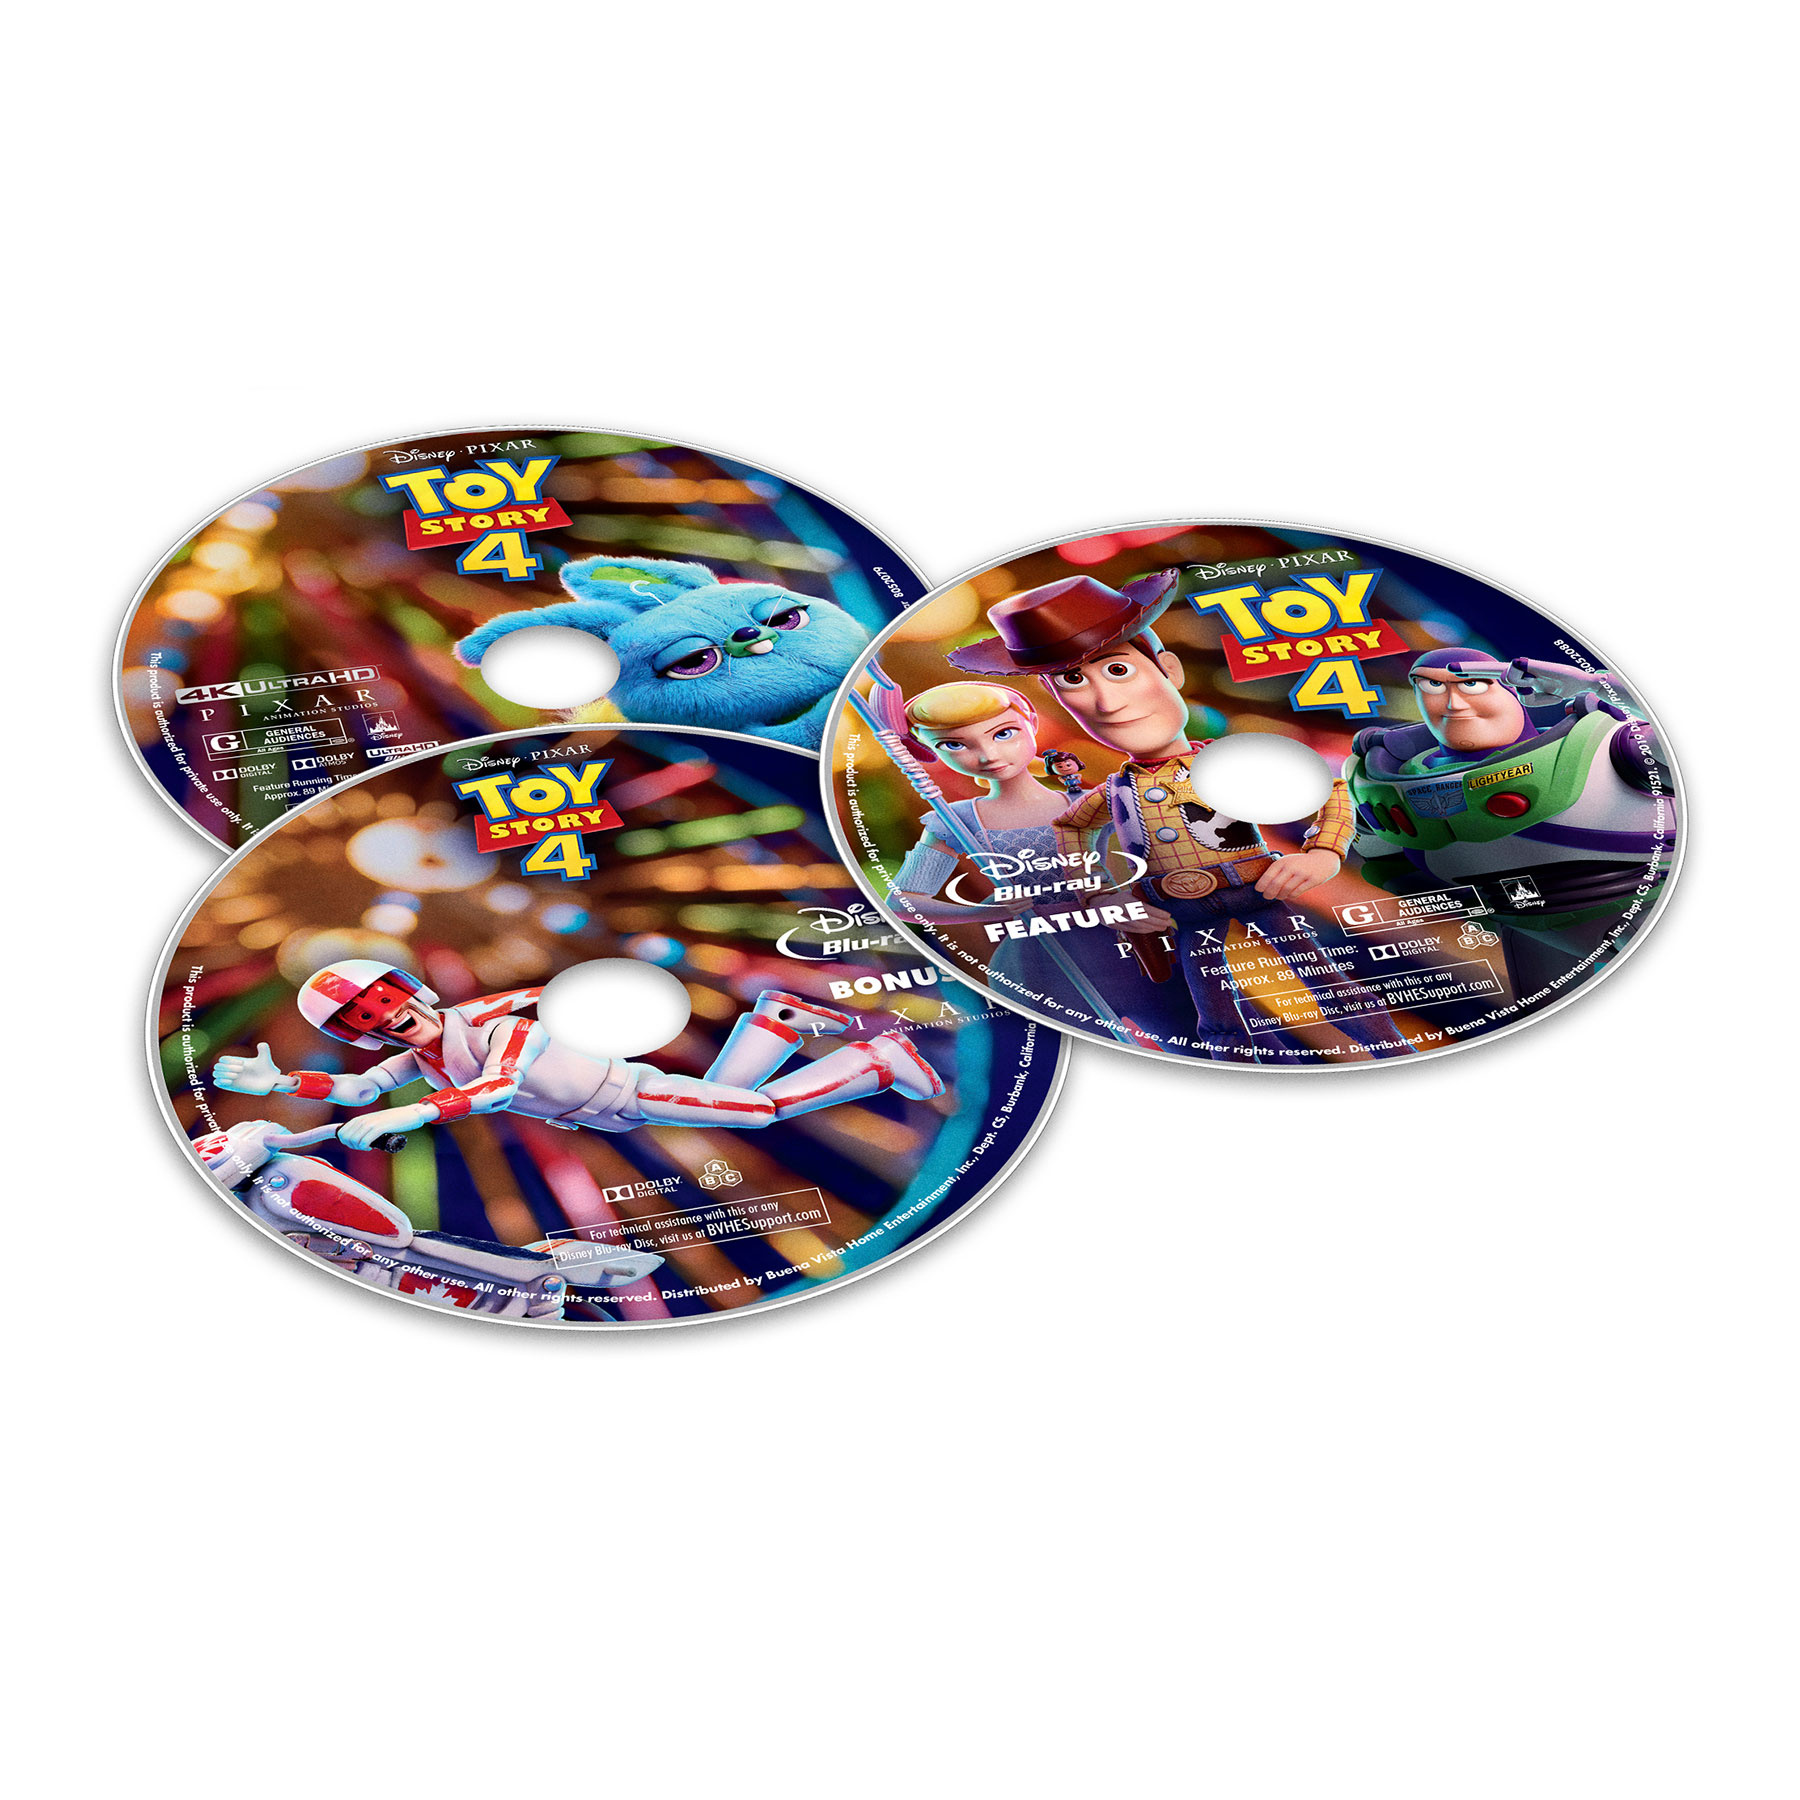 Toy Story 4 DVD Labels